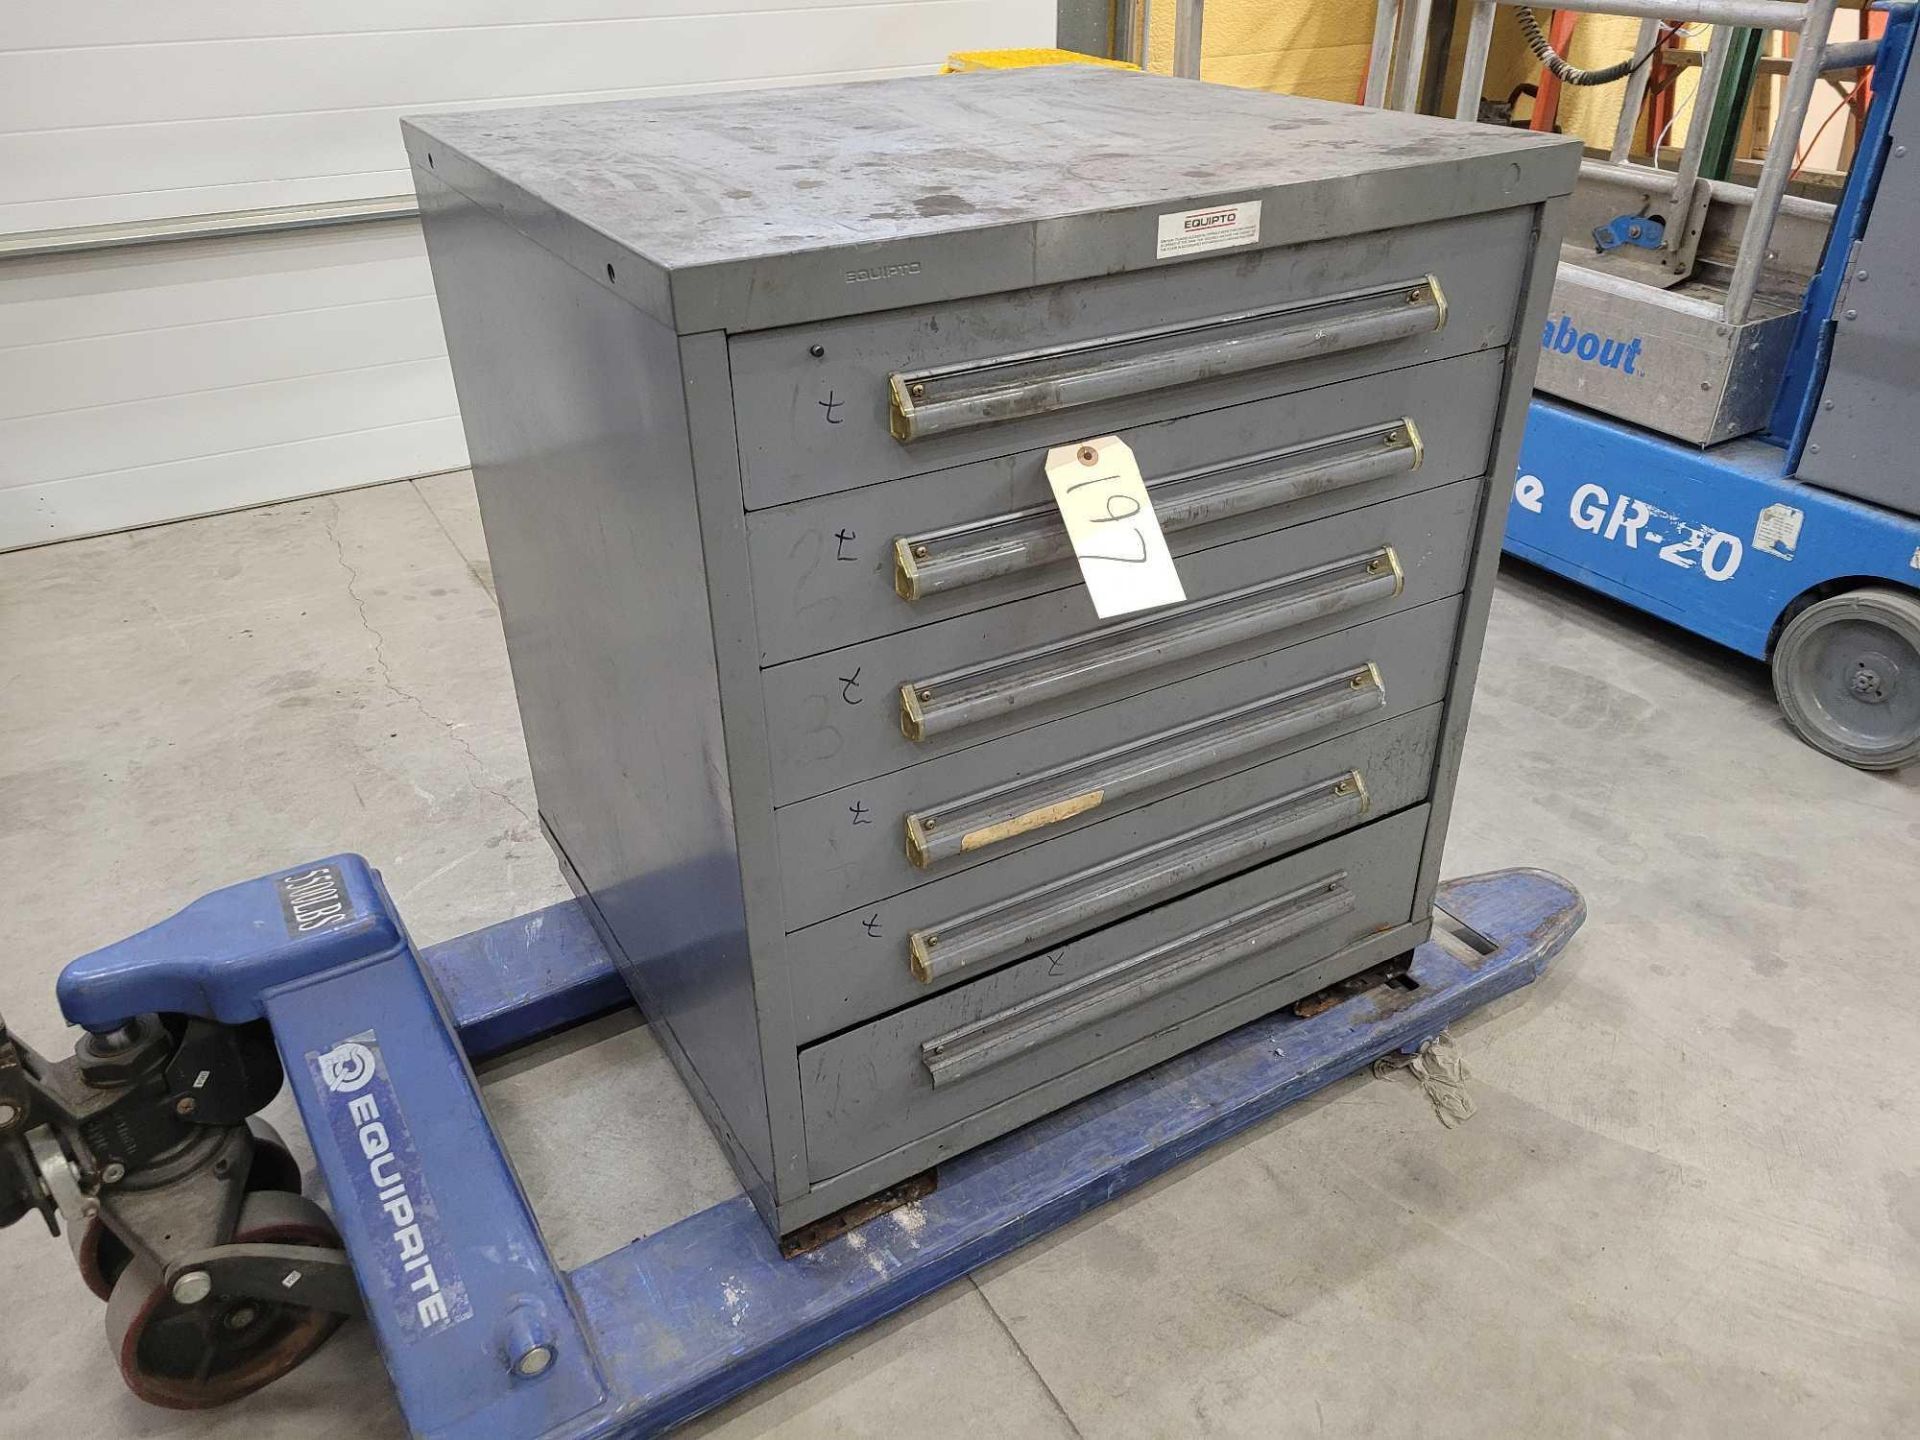 EQUIPTO TOOL CABINET 30"X27.5"X34" 6 DRAWERS LTL - $75 INCLUDES PALLET, STRAPPING AND LOADING. CUSTO